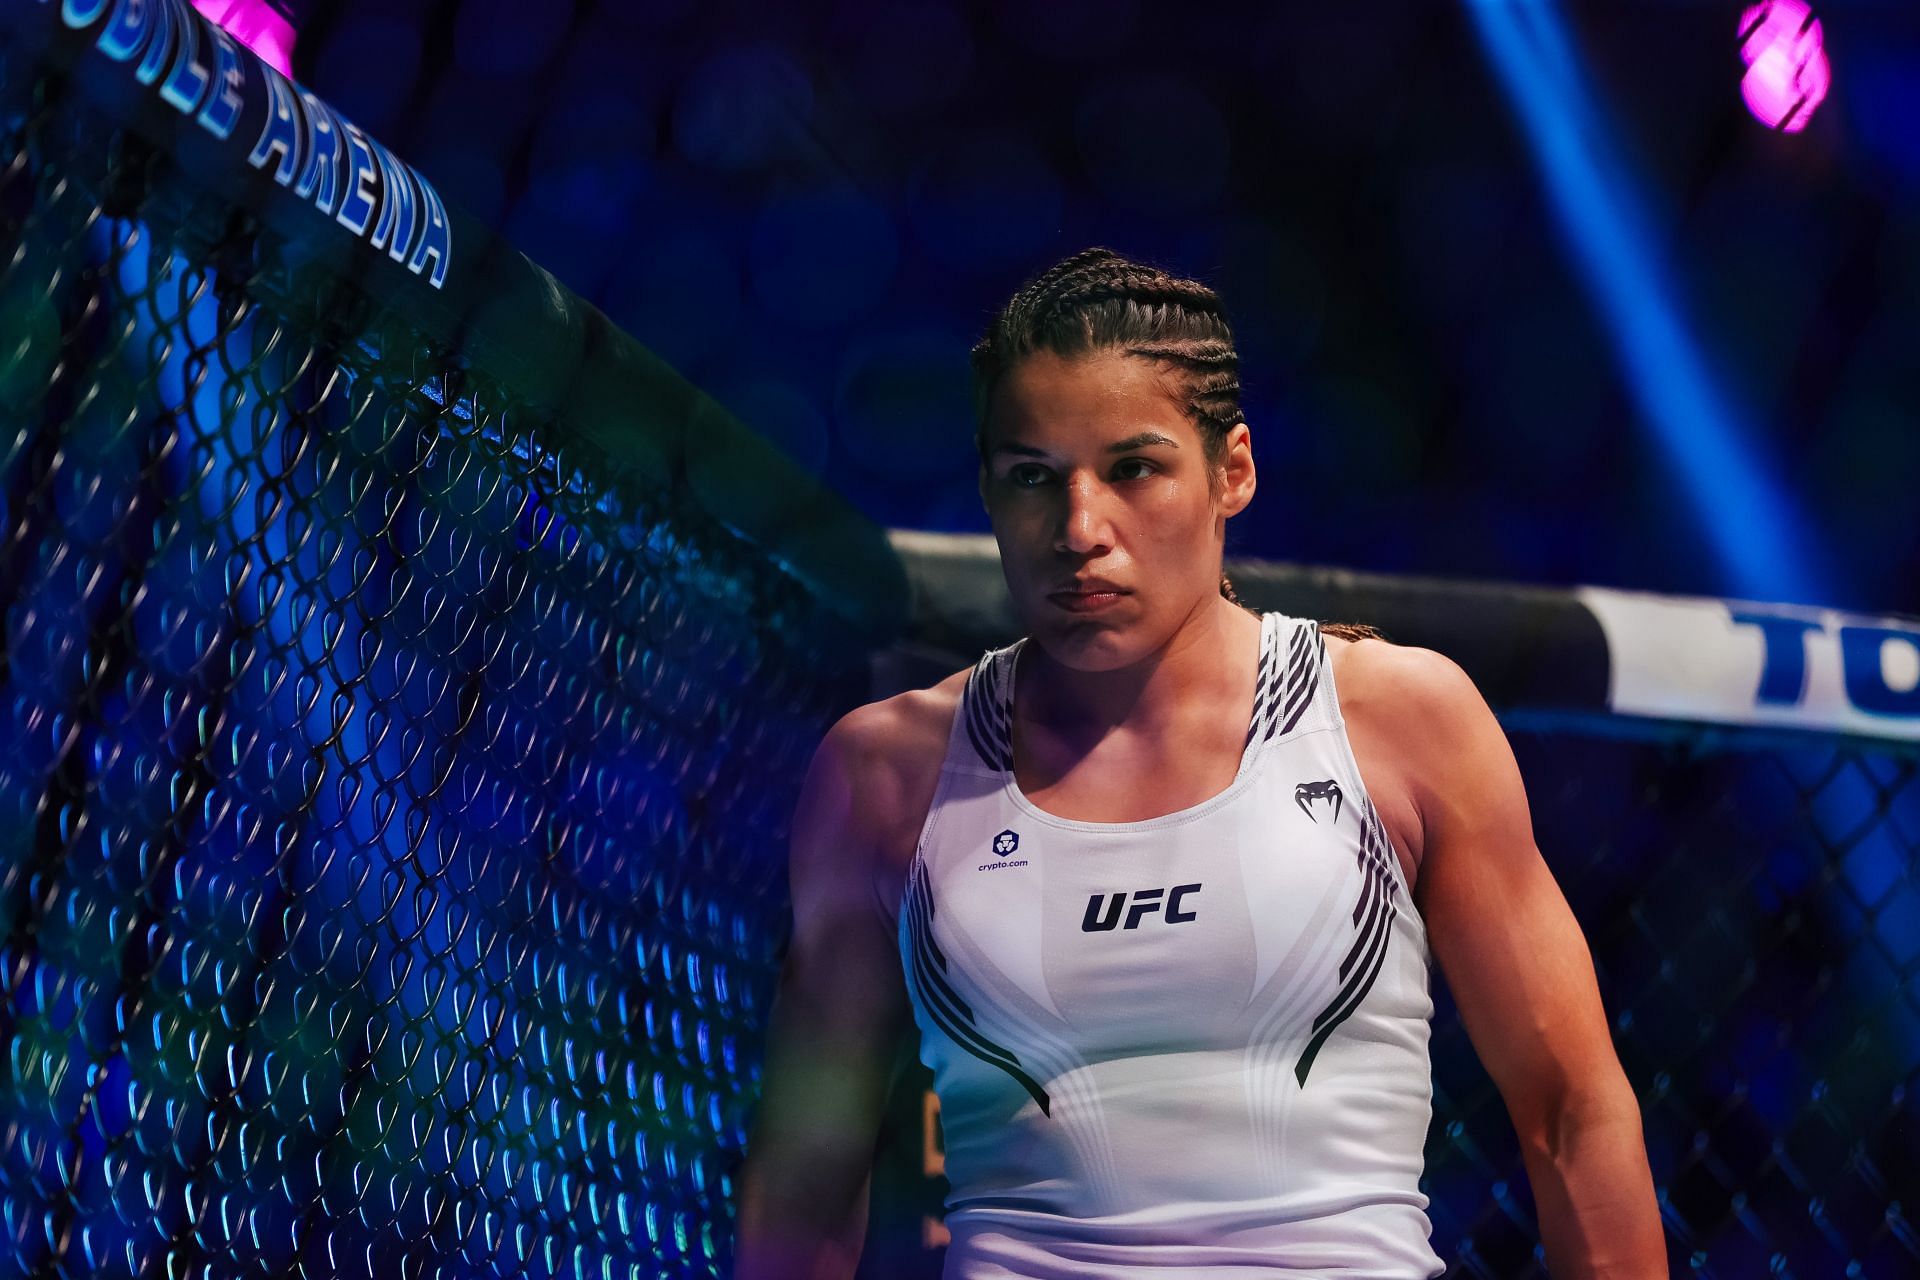 Julianna Pena at UFC 269 [Image courtesy: Getty images]